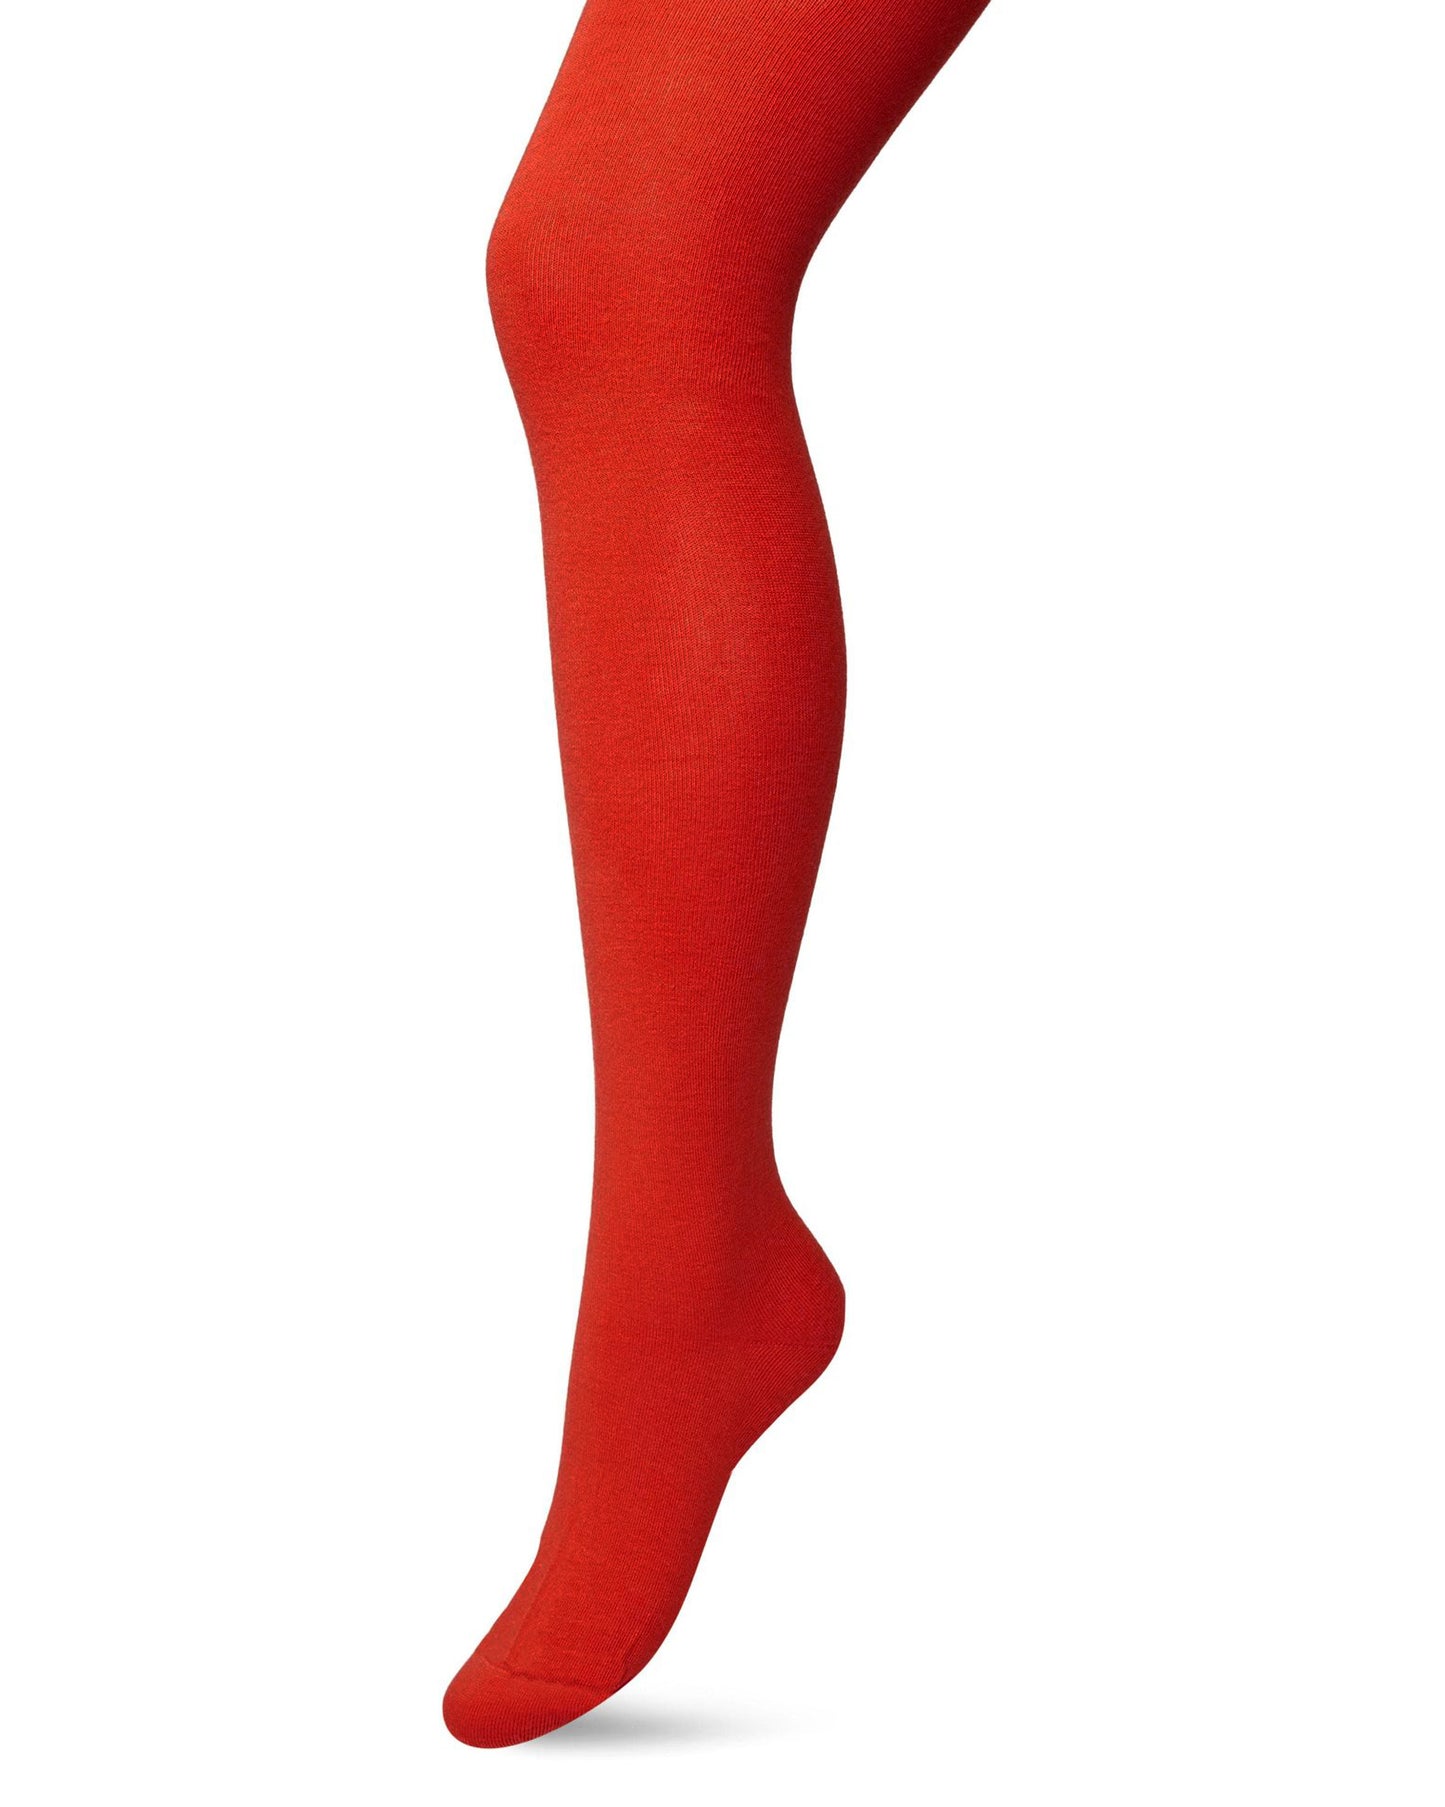 Bonnie Doon Bio Cotton Tights - Red (southern fish red) Warm and soft knitted organic cotton Winter thermal tights.